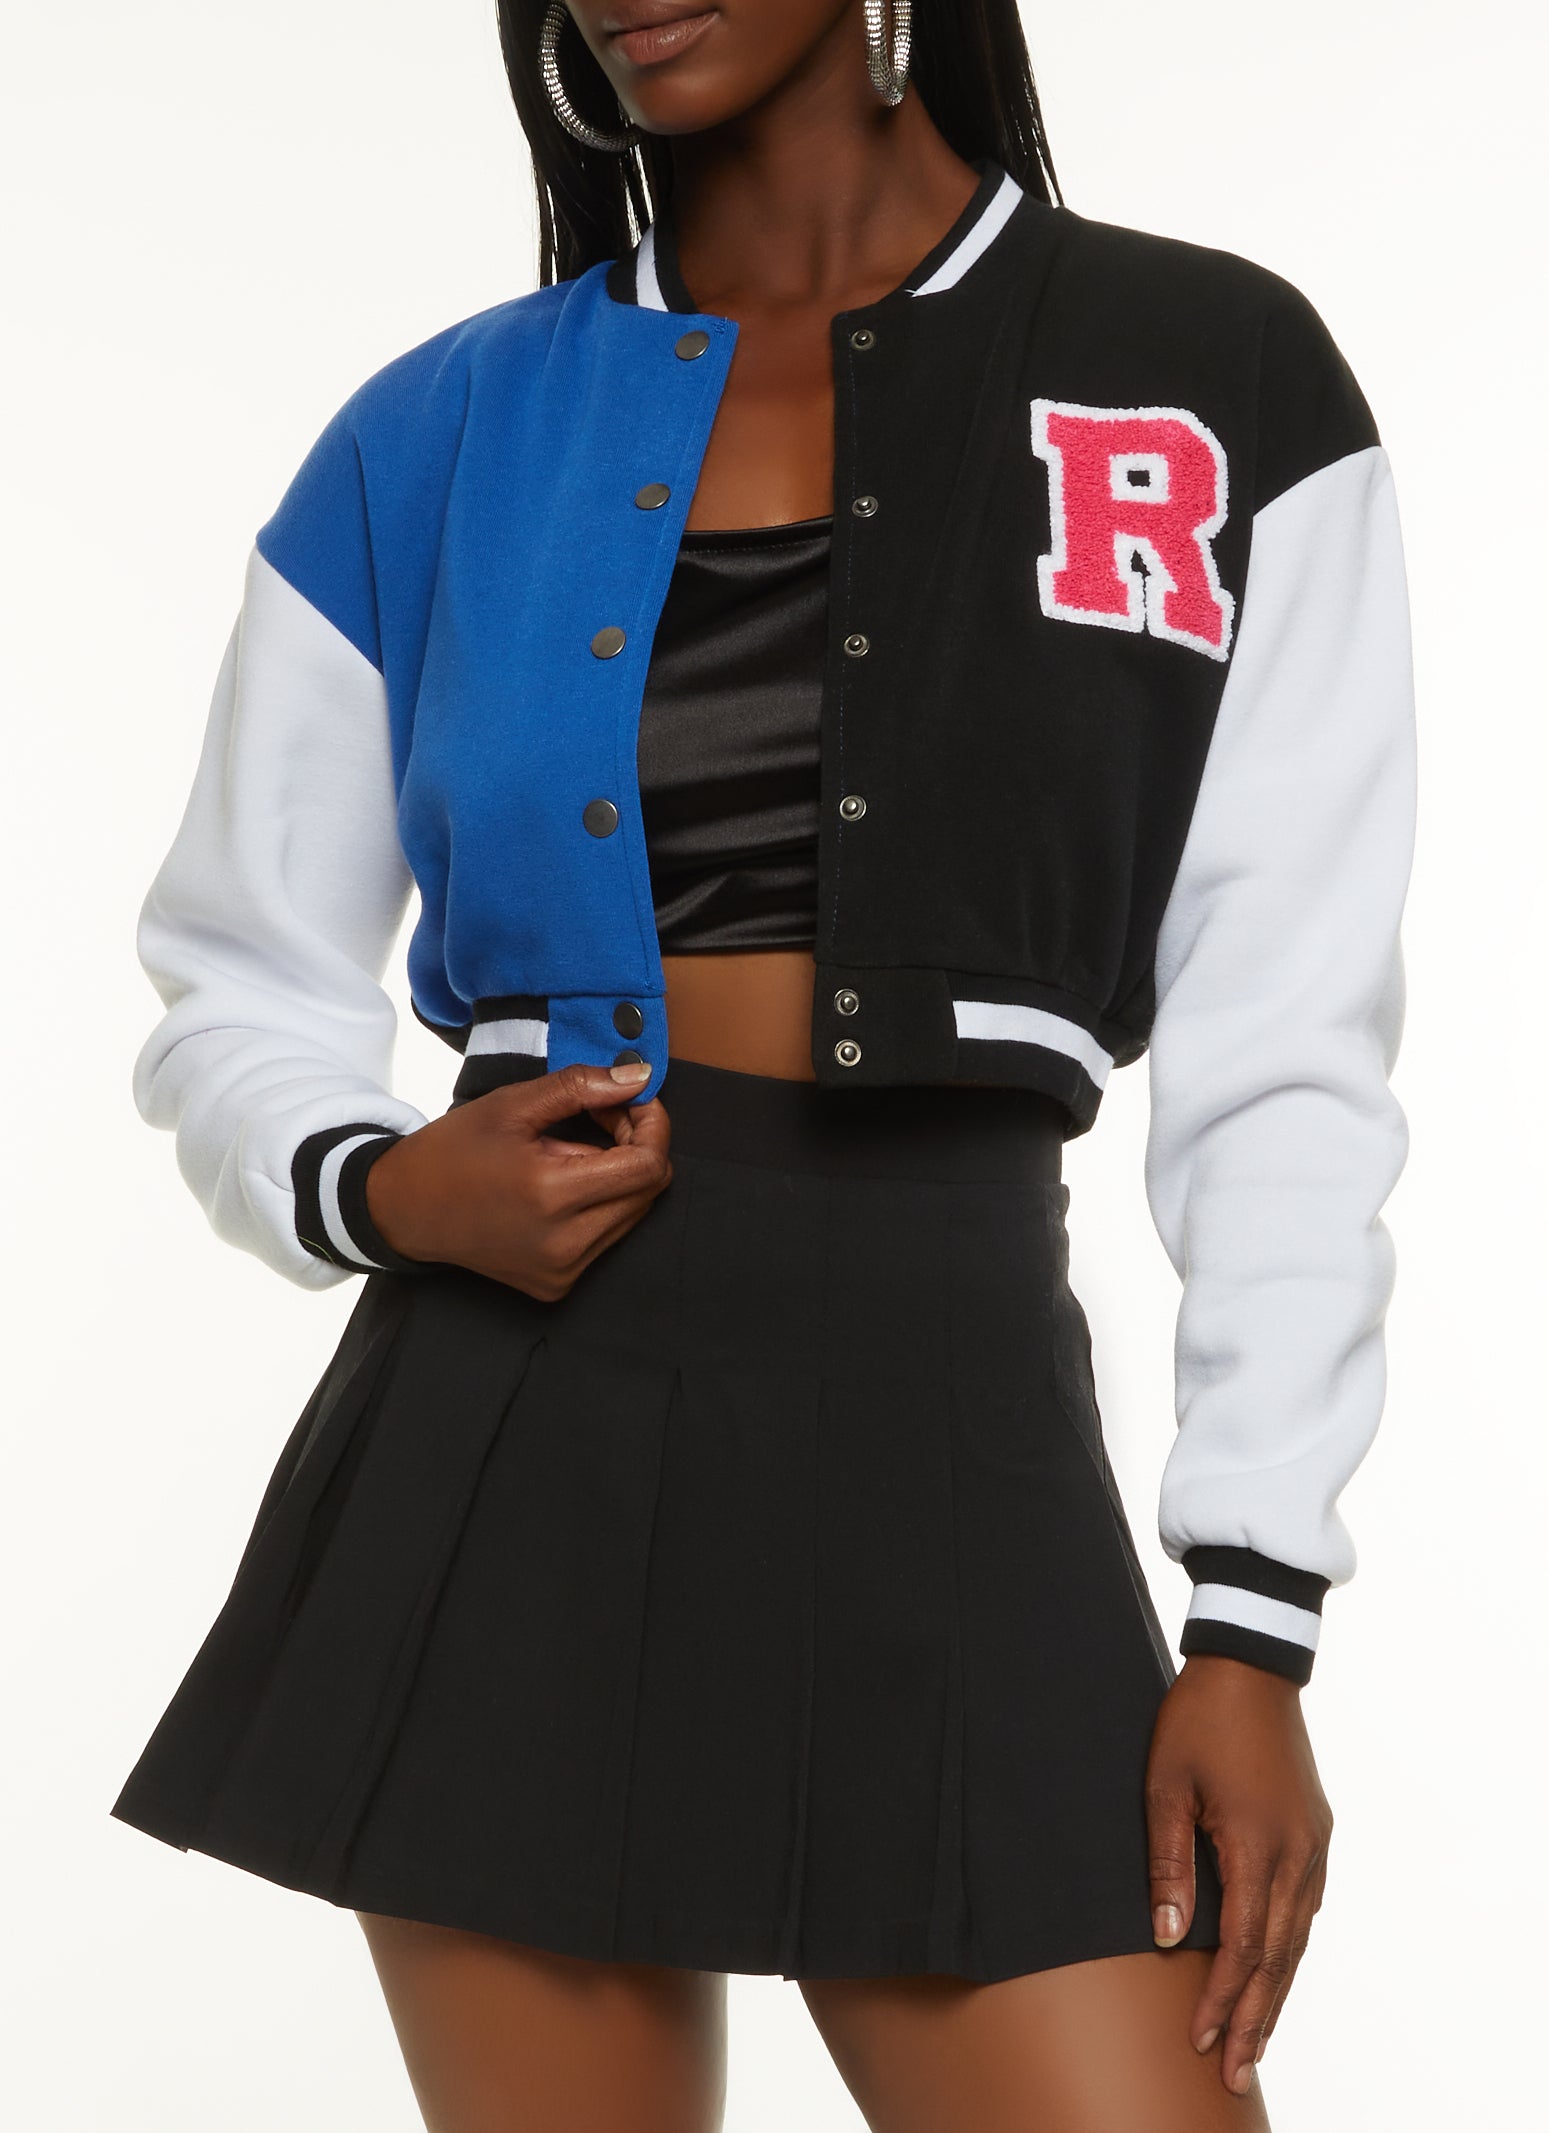 black varsity letterman jacket with white crop top and sweatpants